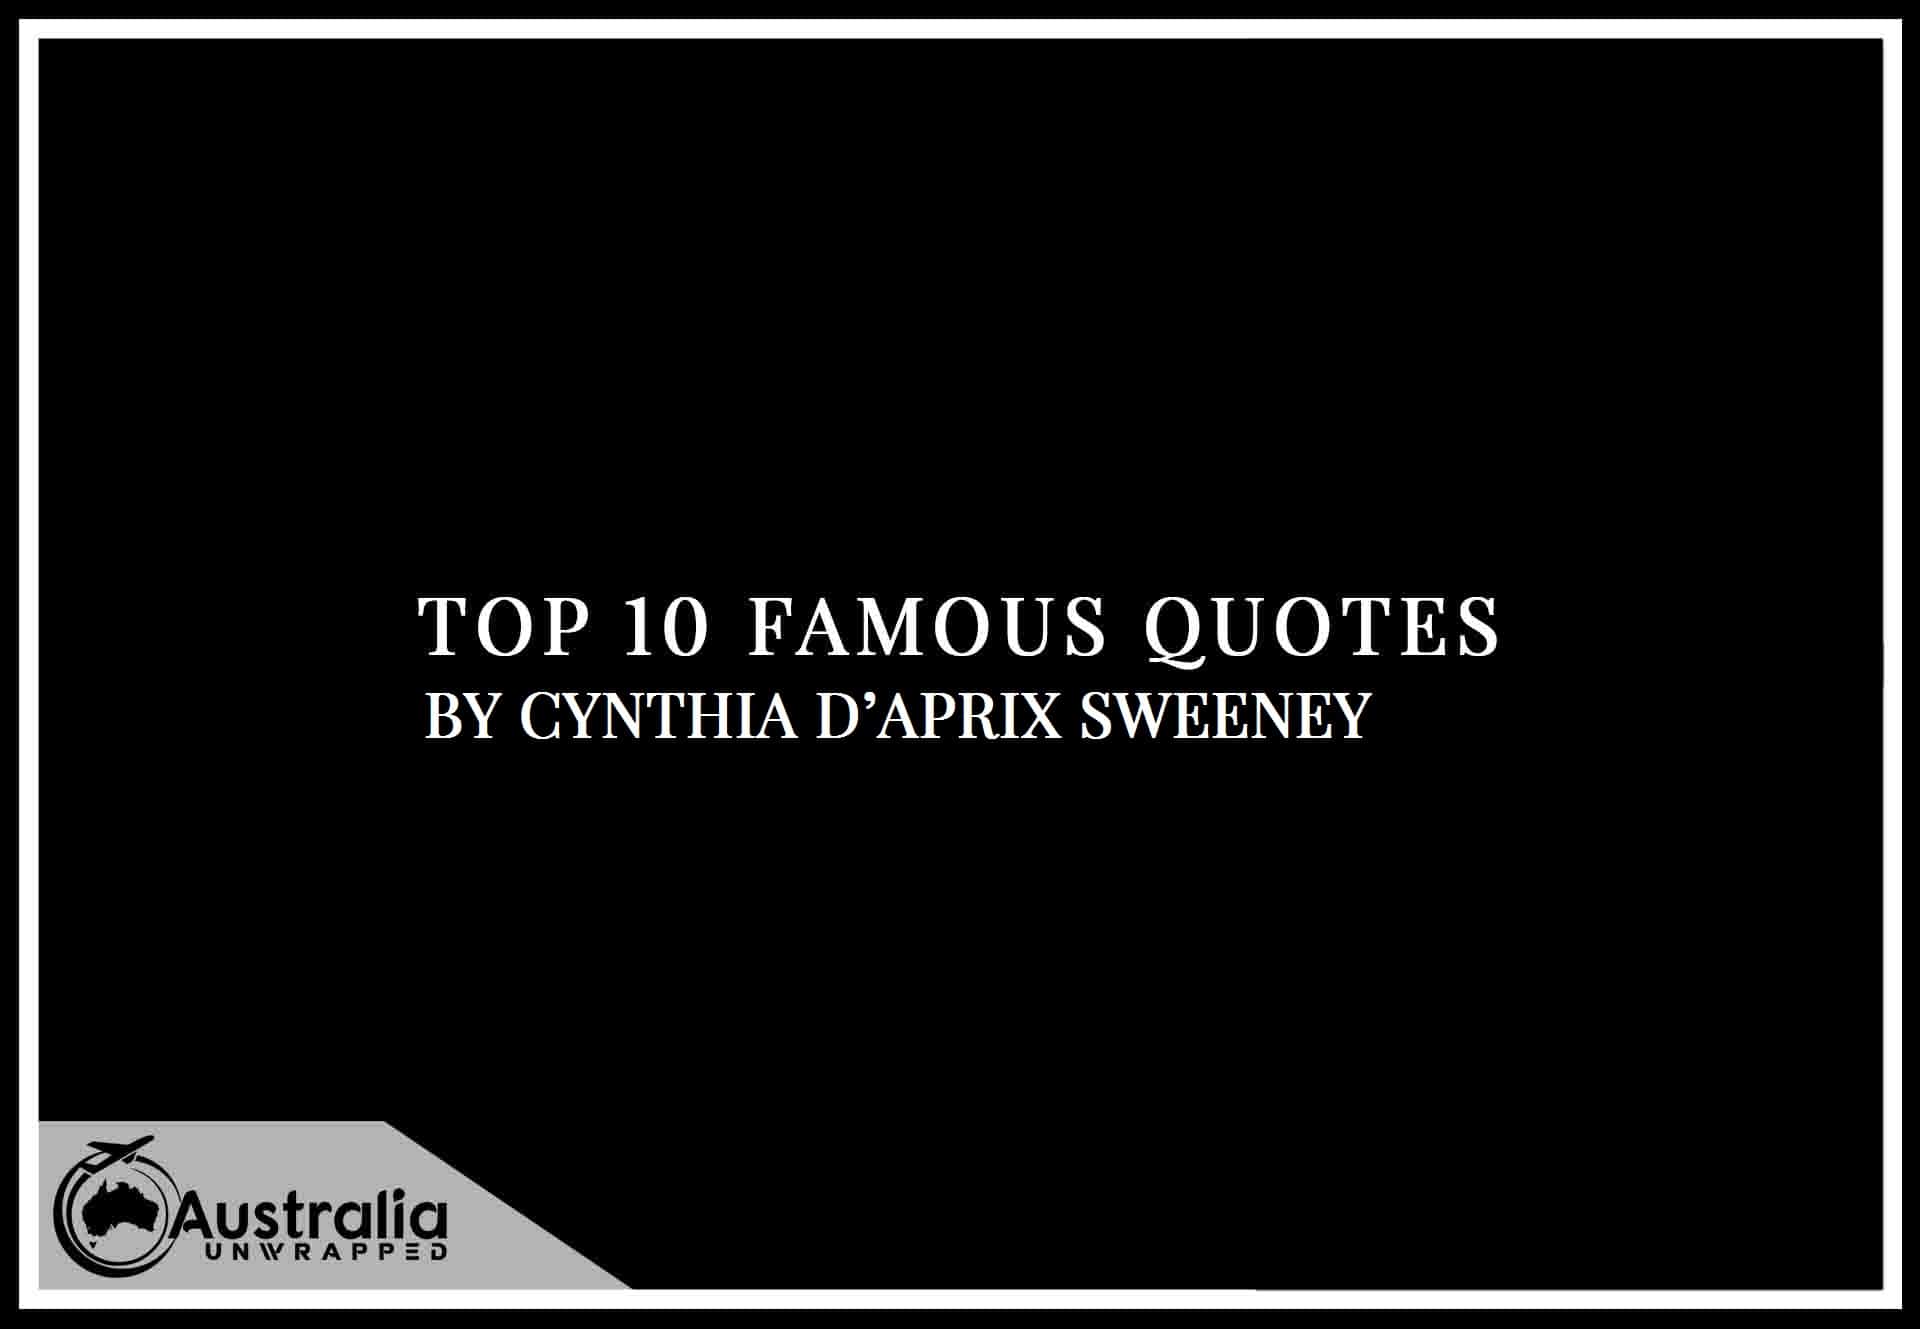 Cynthia D'Aprix Sweeney’s Top 10 Popular and Famous Quotes